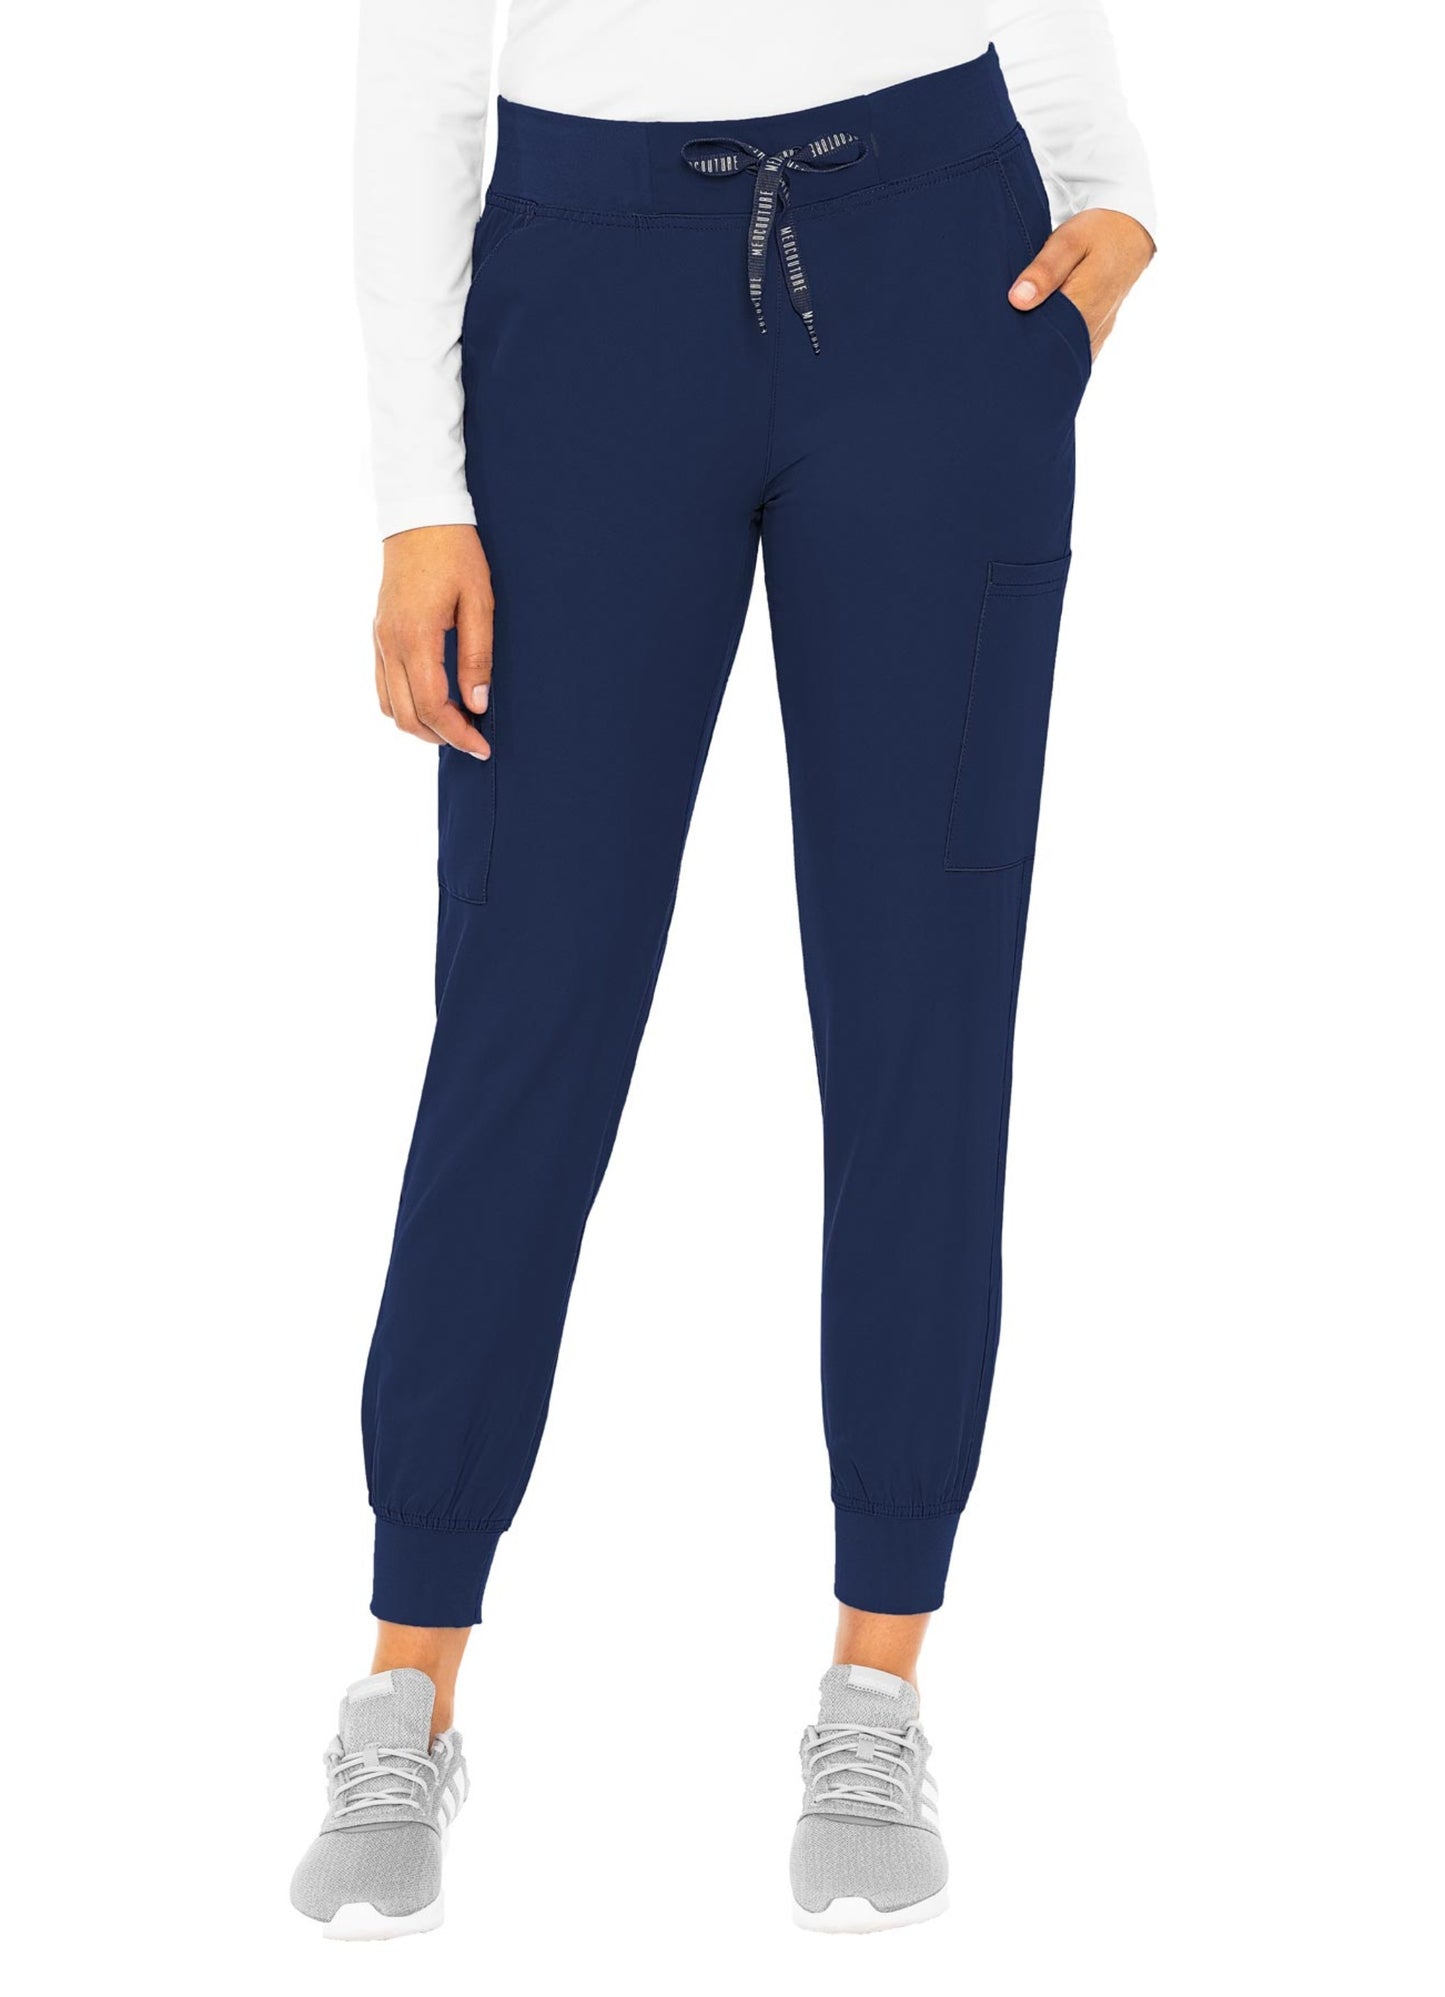 Med Couture Insight joggers